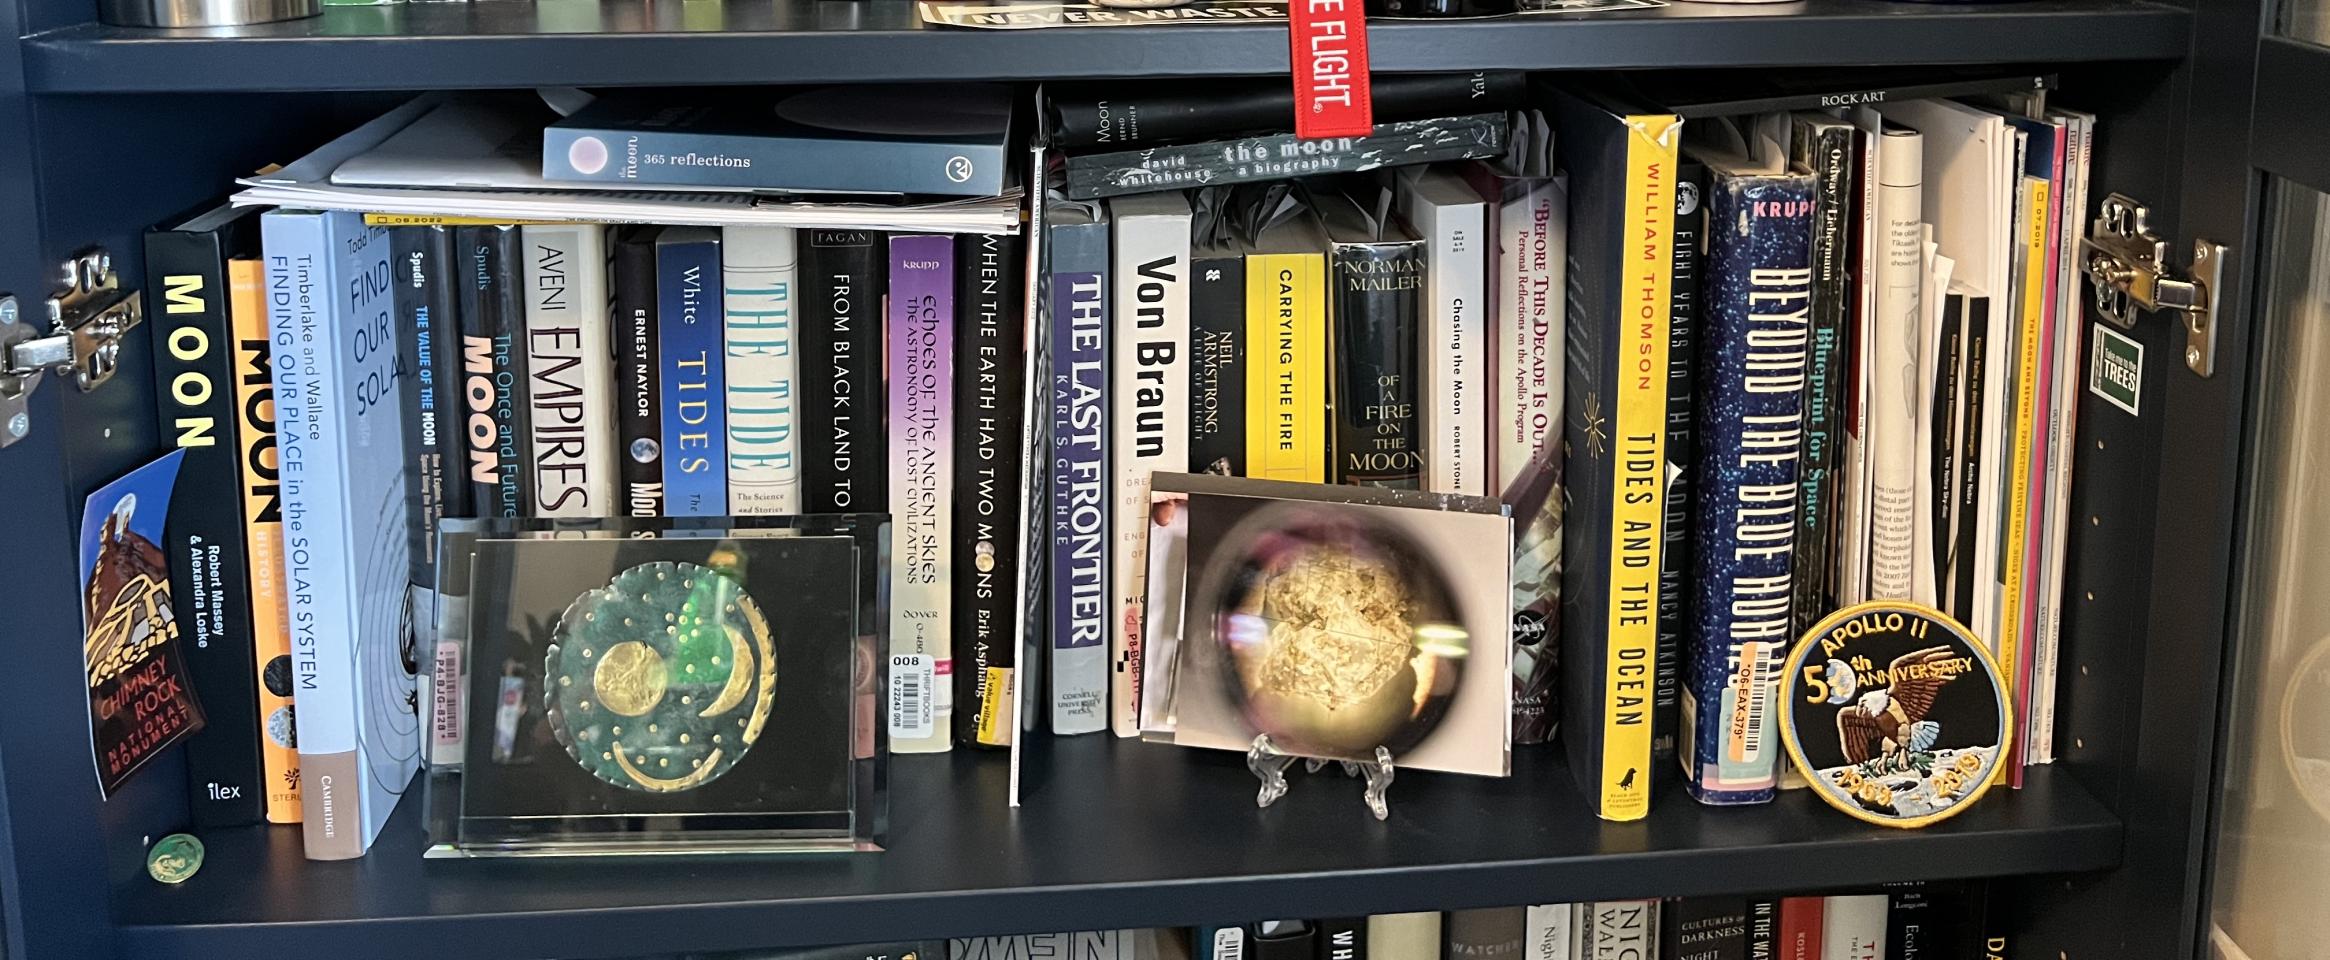 Rectangular photo of Rebecca Boyle’s office bookshelves showing works on the moon, the Solar System, tides, cosmology, and astronomy. Photo credit: Rebecca Boyle.